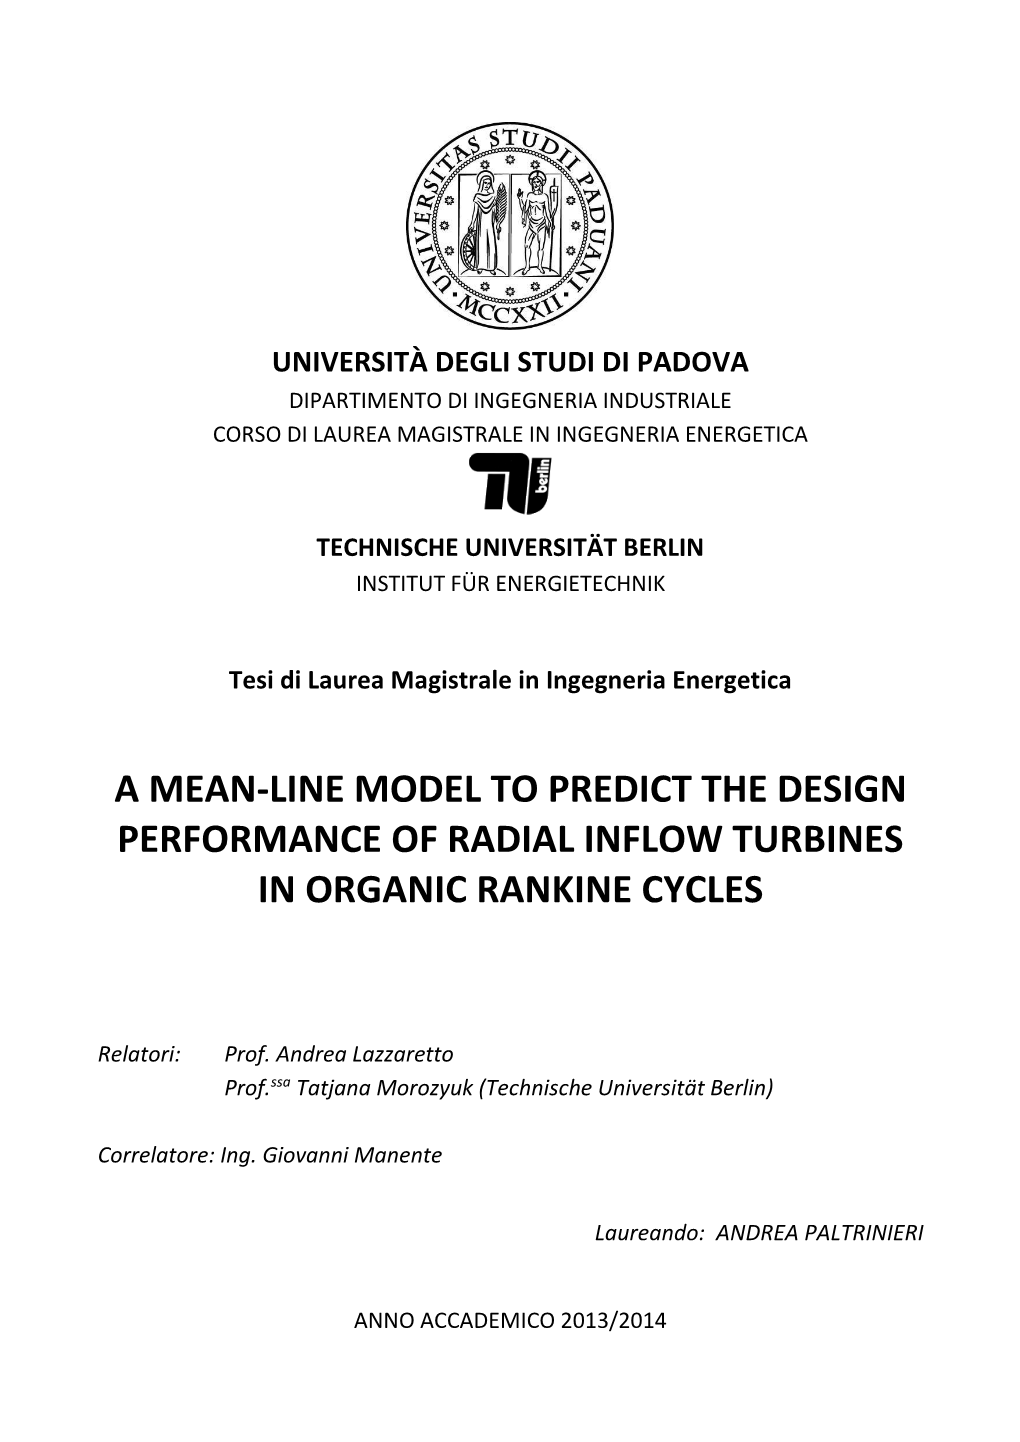 A Mean-Line Model to Predict the Design Performance of Radial Inflow Turbines in Organic Rankine Cycles